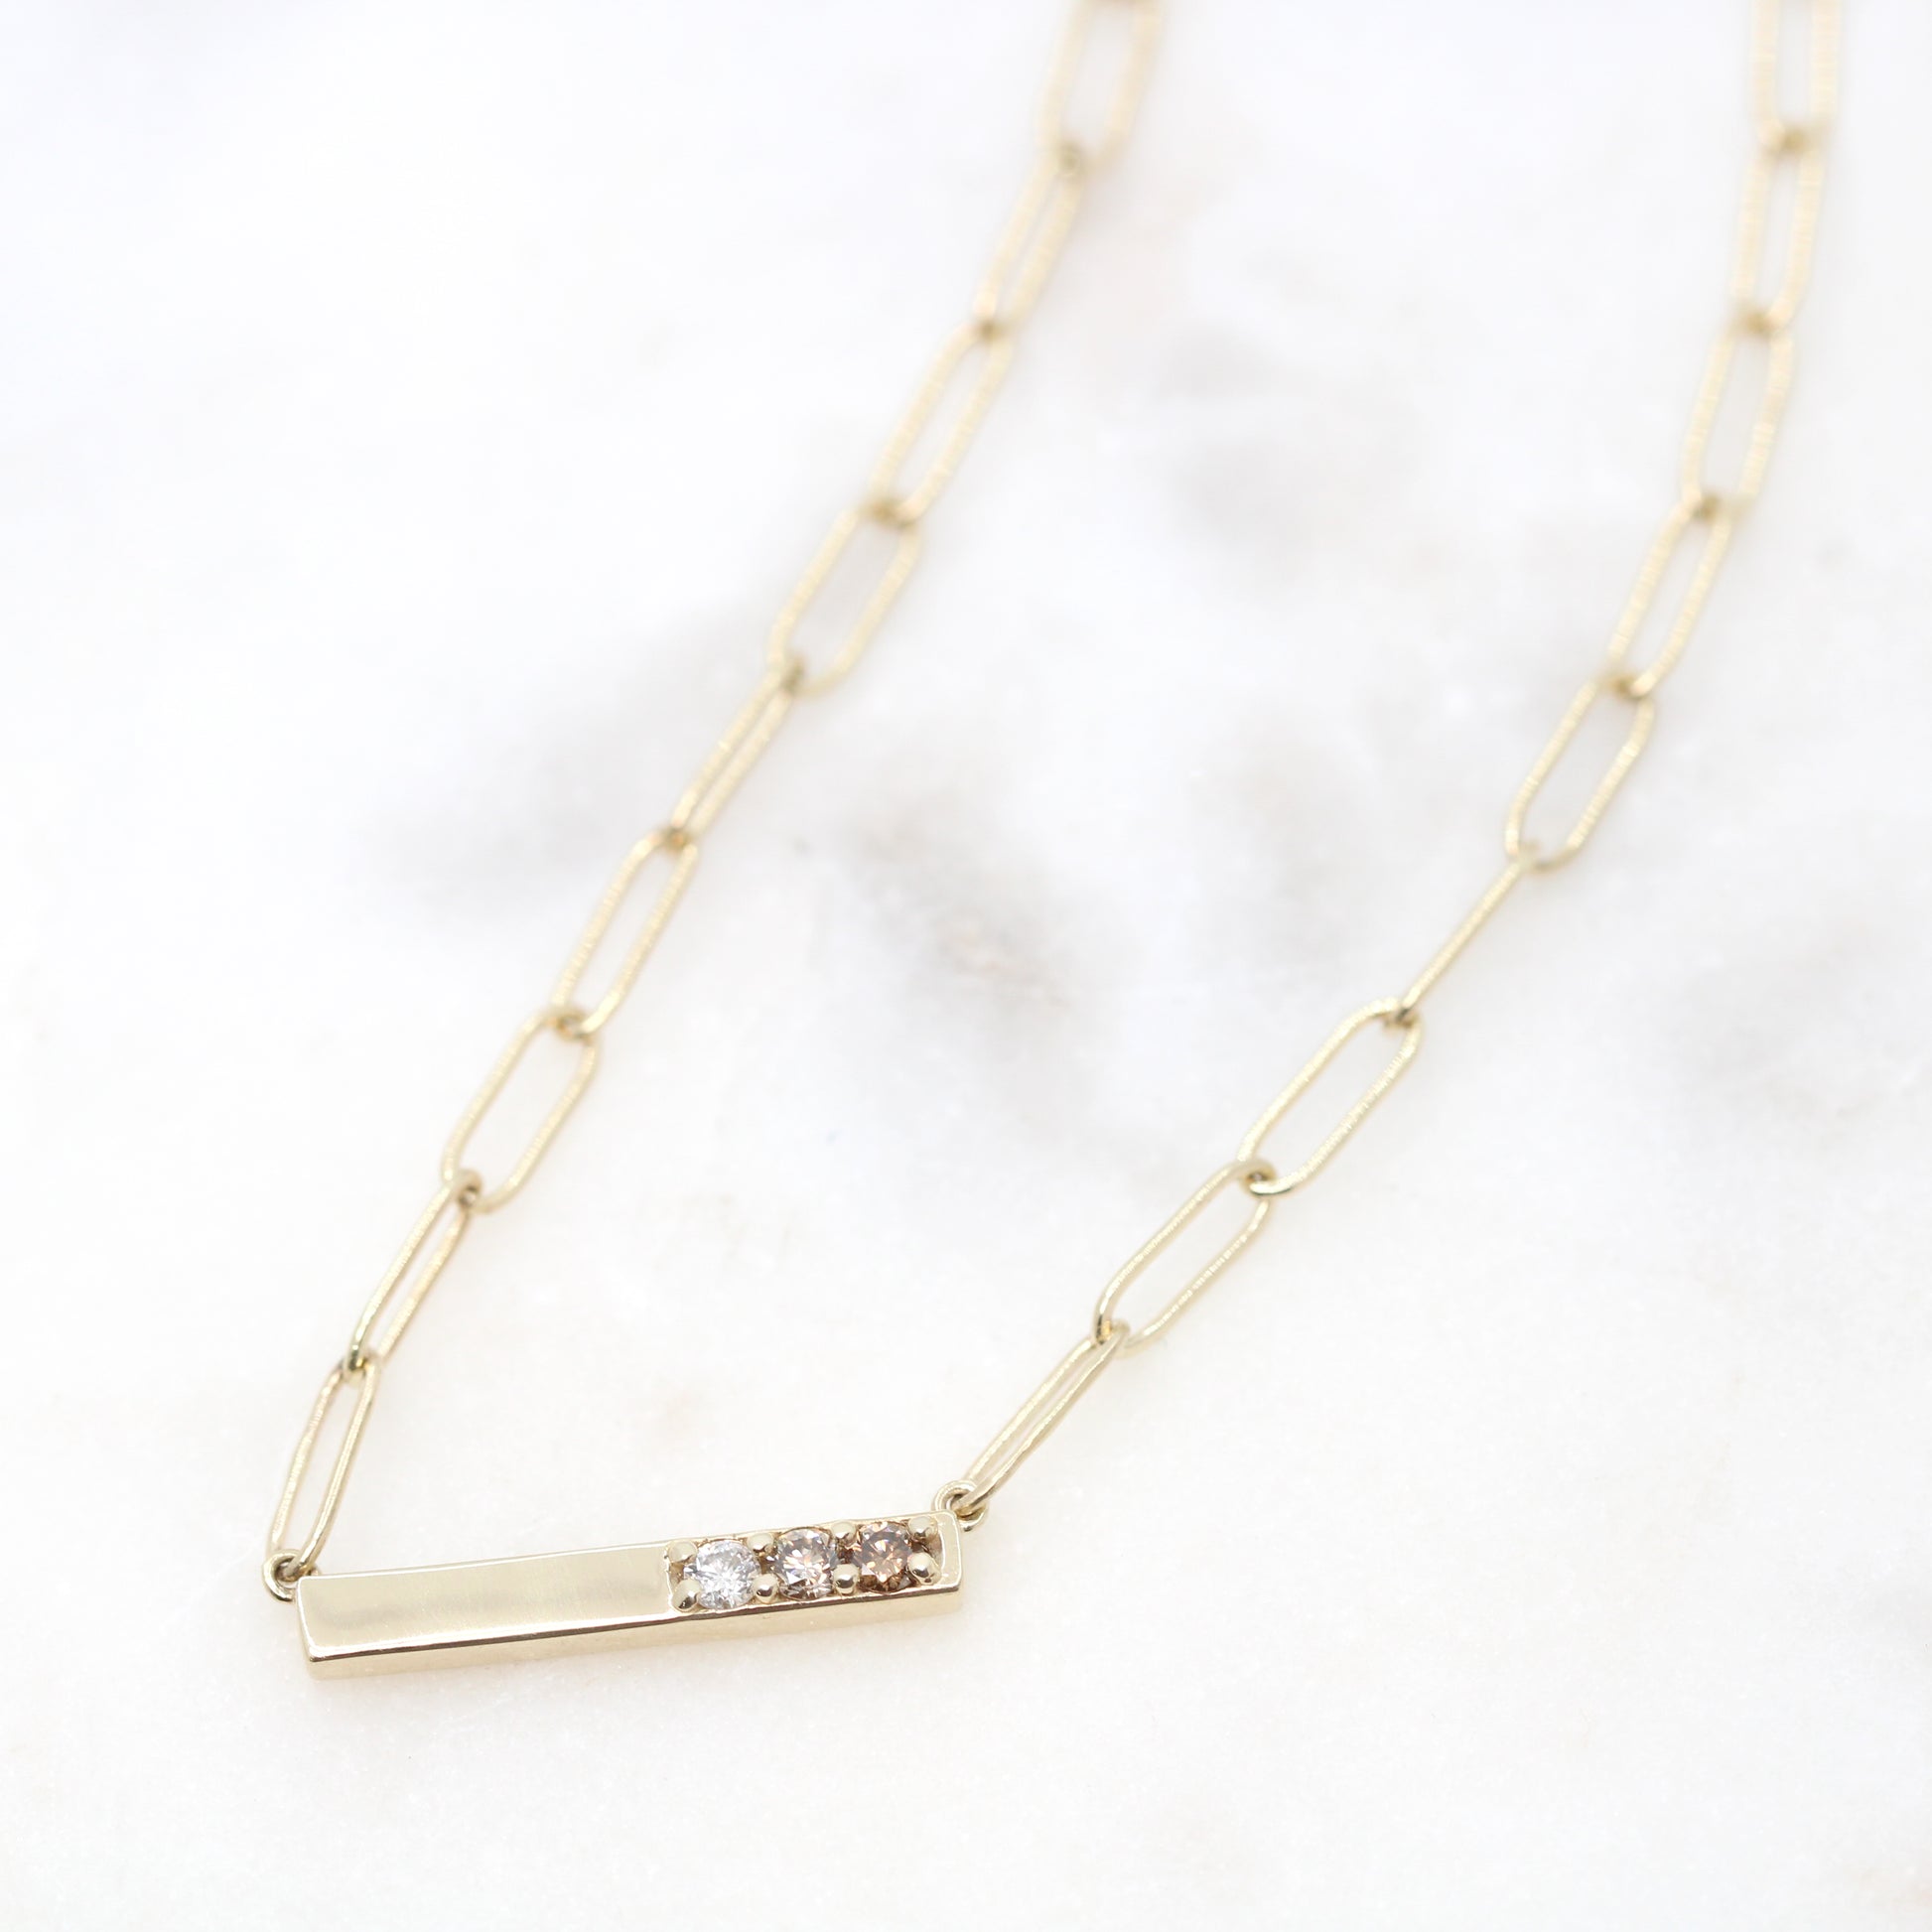 Cheri Necklace with White, Champagne and Cognac Diamonds in 10k Yellow Gold - Ready to Ship - Midwinter Co. Alternative Bridal Rings and Modern Fine Jewelry